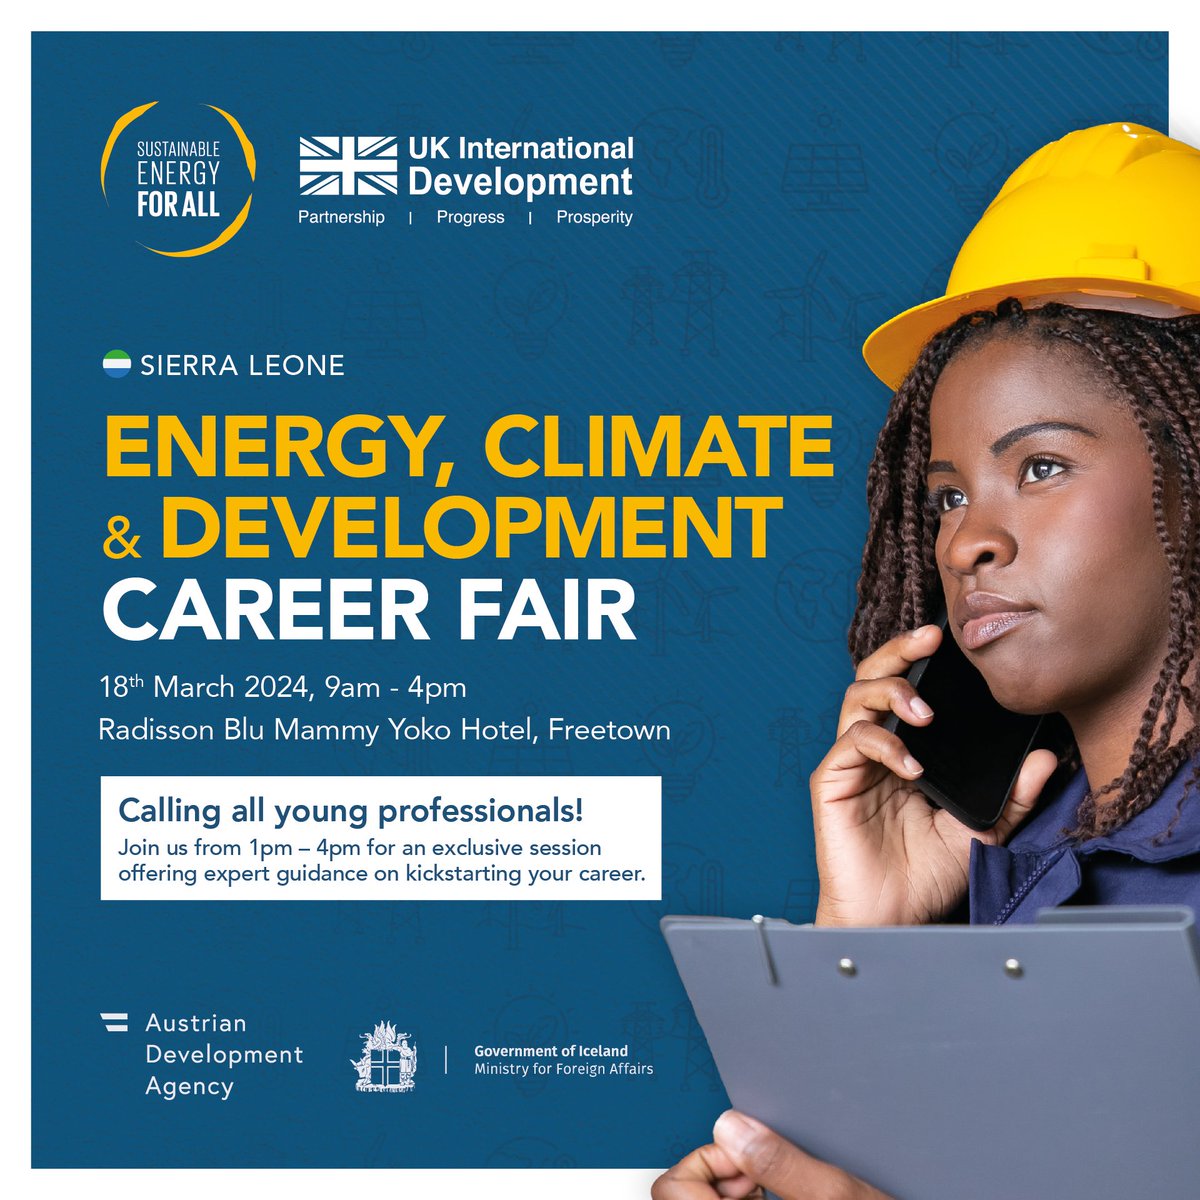 ⏰ It's almost time! The @SEforALLorg Energy, Climate, and Development Career Fair is just 1 day away! Get ready to dive into the world of clean energy and sustainability in Freetown 🇸🇱. Stay tuned for insights.